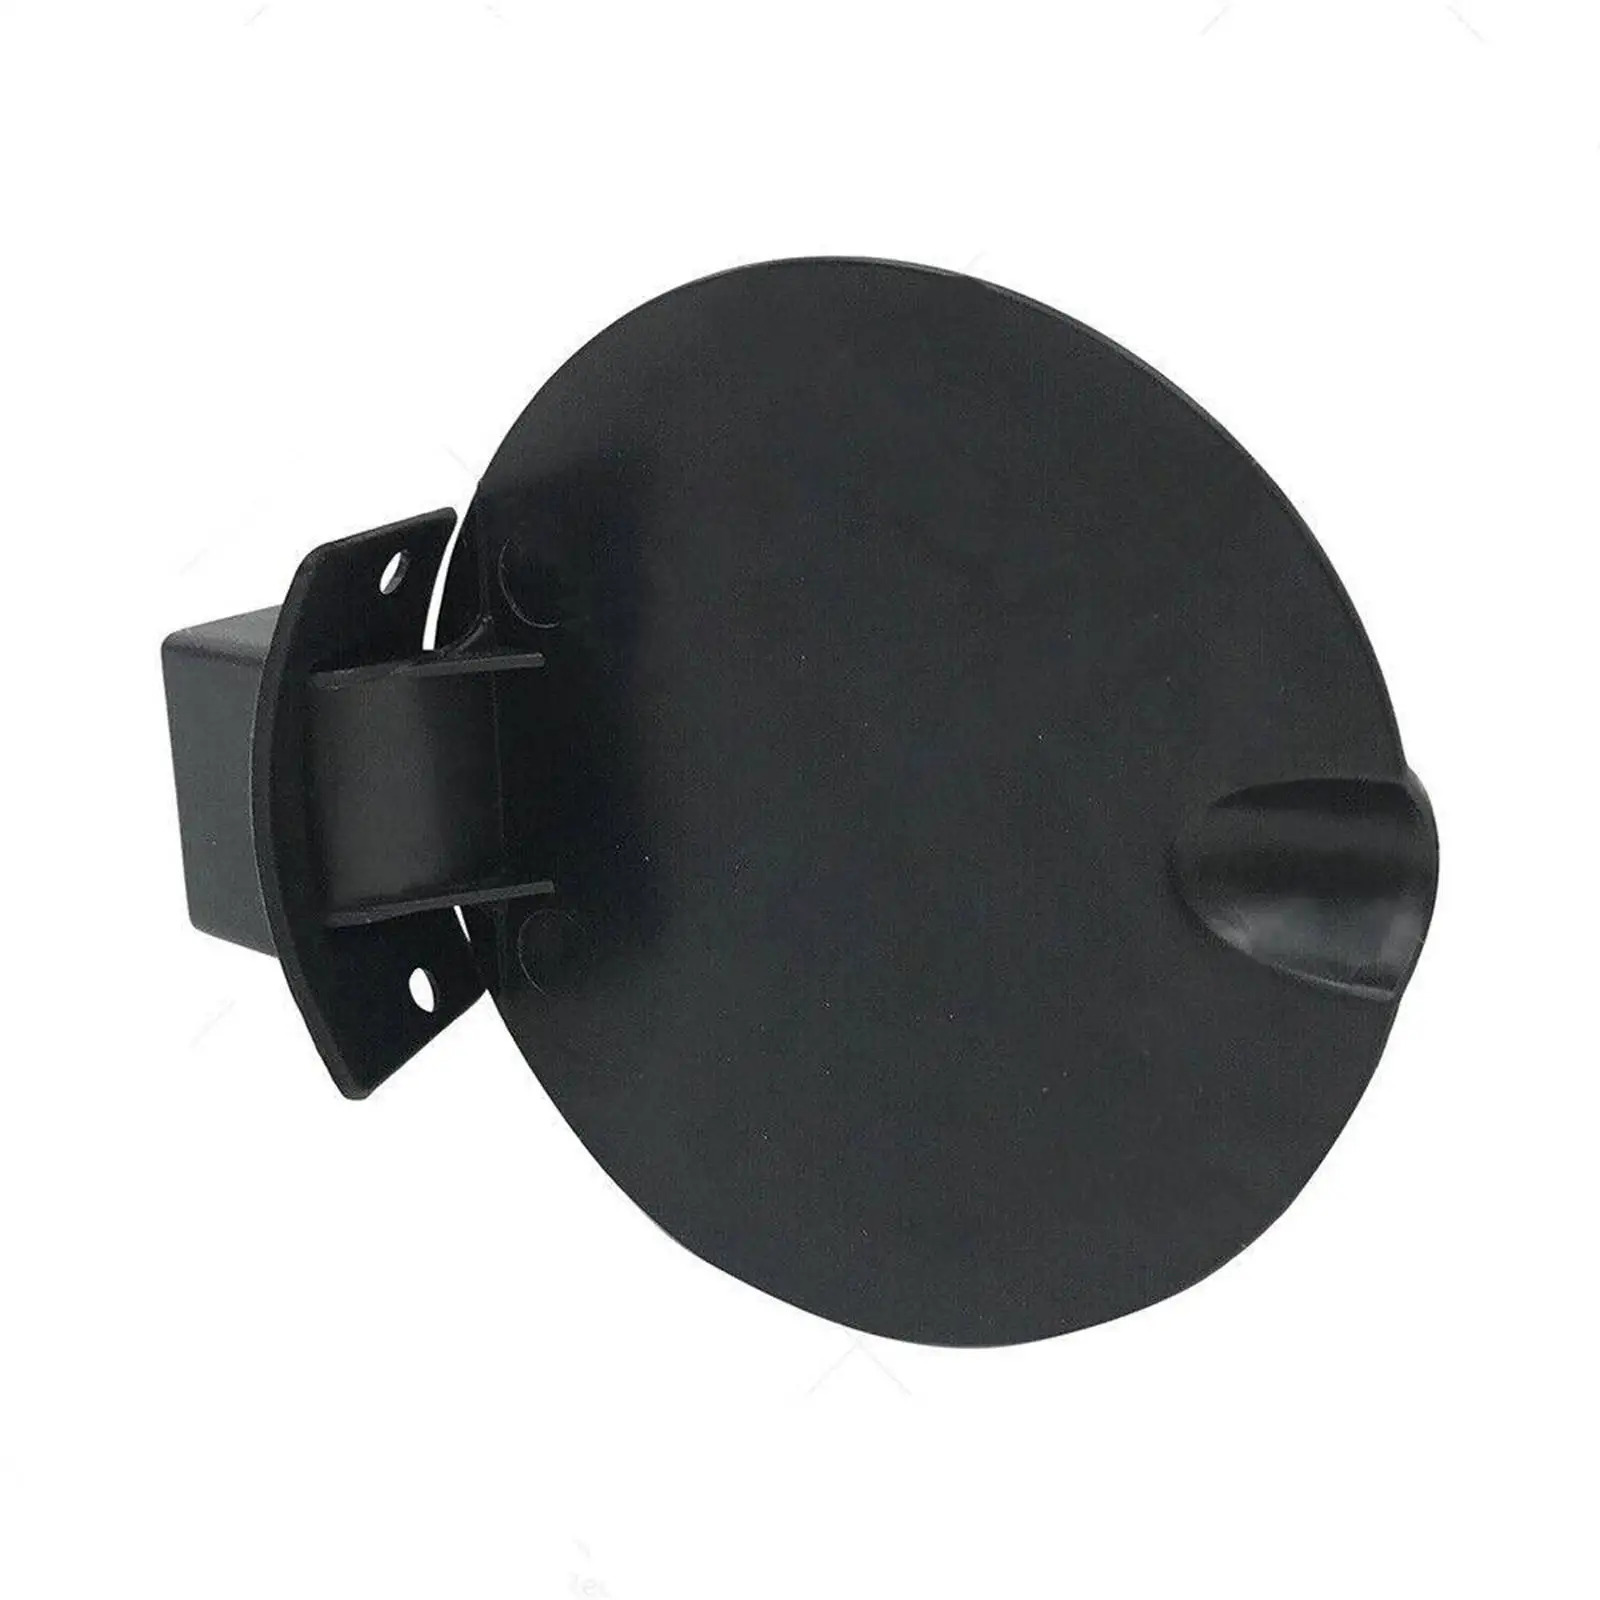 Fuel Filler Flap Fuel Tank Cap Modification Fuel Filler Flap Cover Lid for Holden Ute VU Vy Vz Sturdy Easily Install